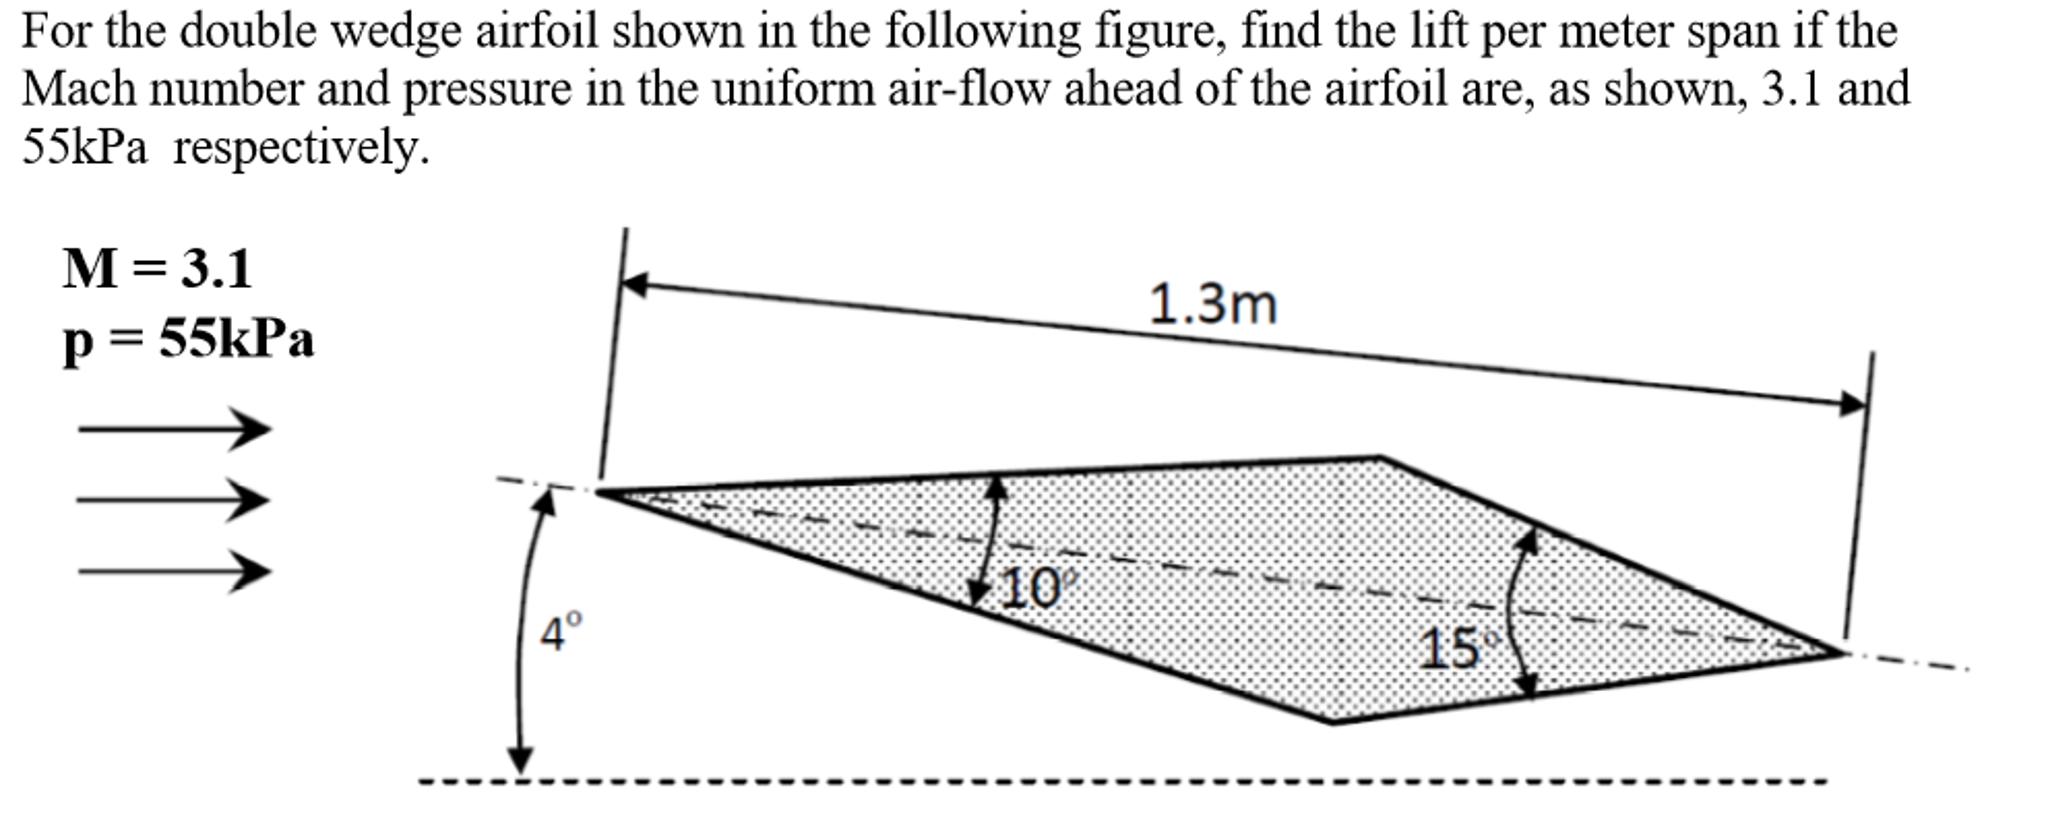 Solved For the double wedge airfoil shown in the following